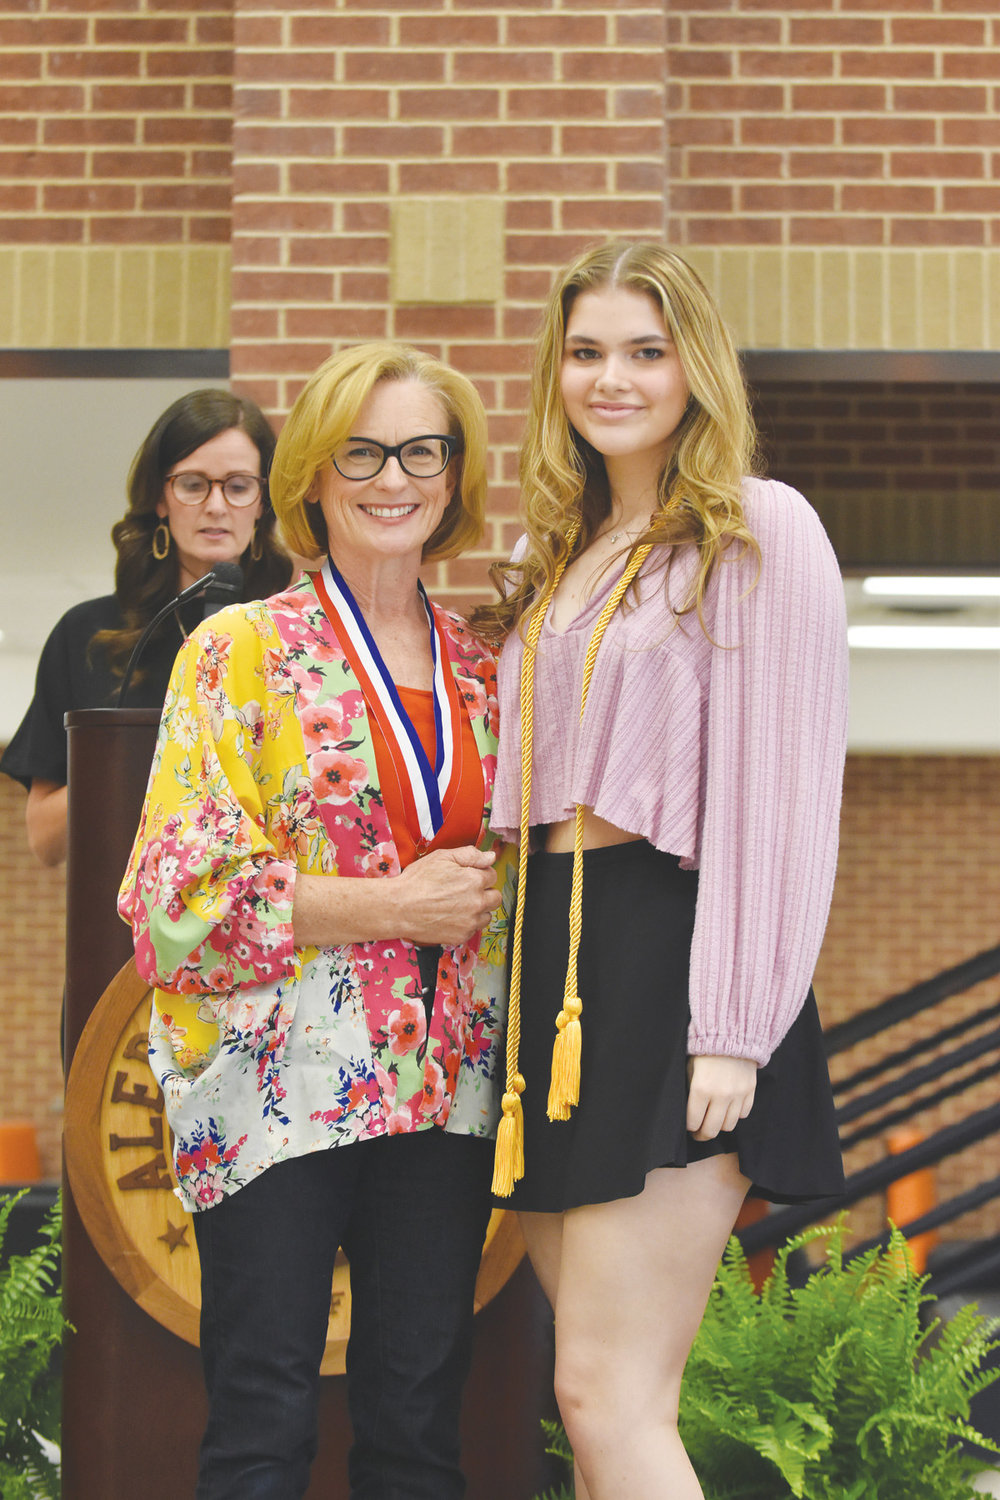 Victoria Jordan is the daughter of Kara Touliatos. She plans to attend the University of Houston, major in nutrition, and intends to be a registered dietician. She honored Ms. Kristie Vandergriff.